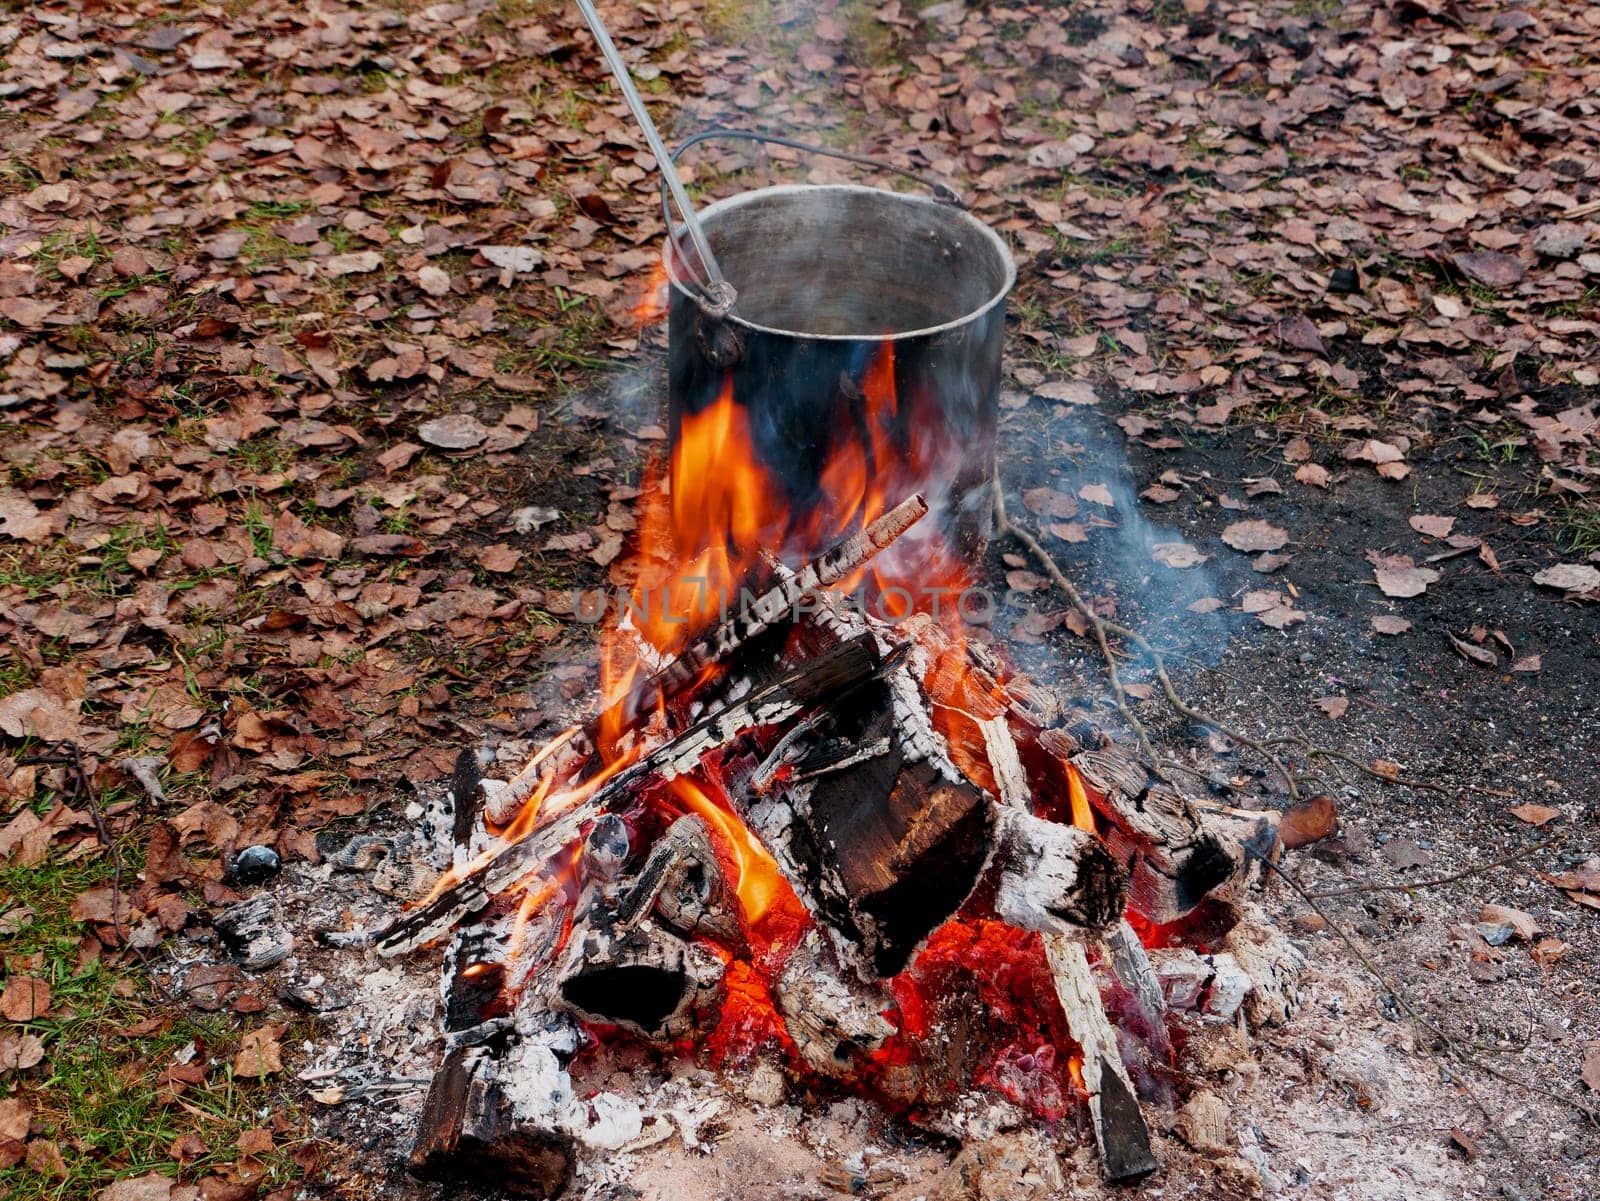 cauldron with food near the fire. Touristic metal bowler pot. Cooking at the campsite, picnic, outdoor recreation.